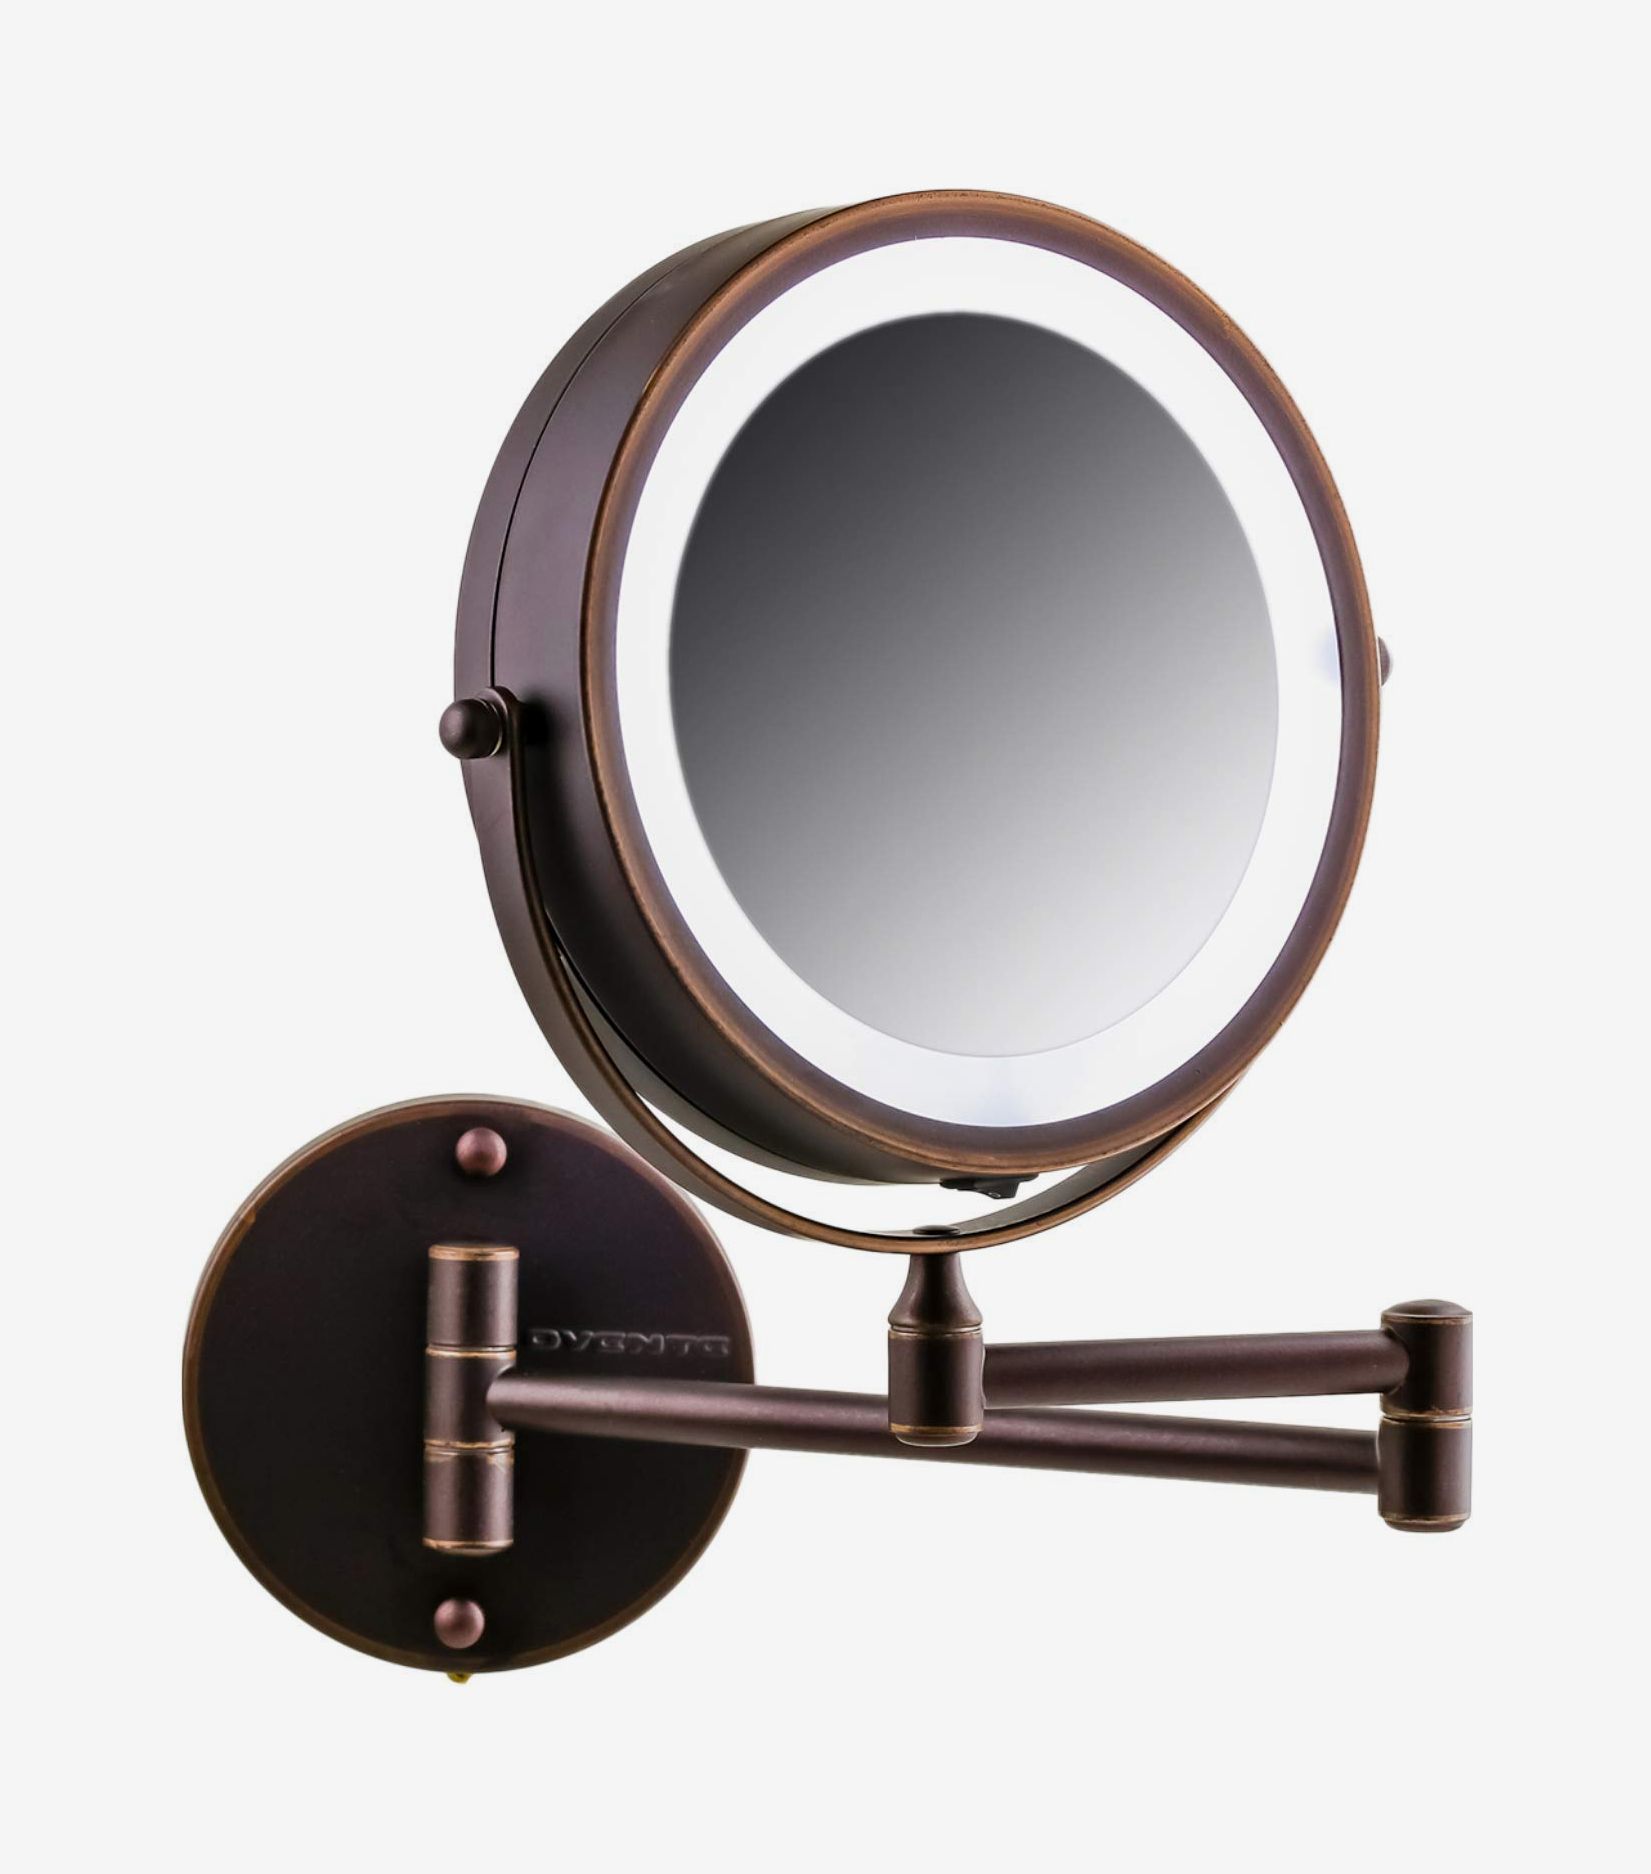 14 Best Lighted Makeup Mirrors 2021, Wall Hanging Makeup Mirror